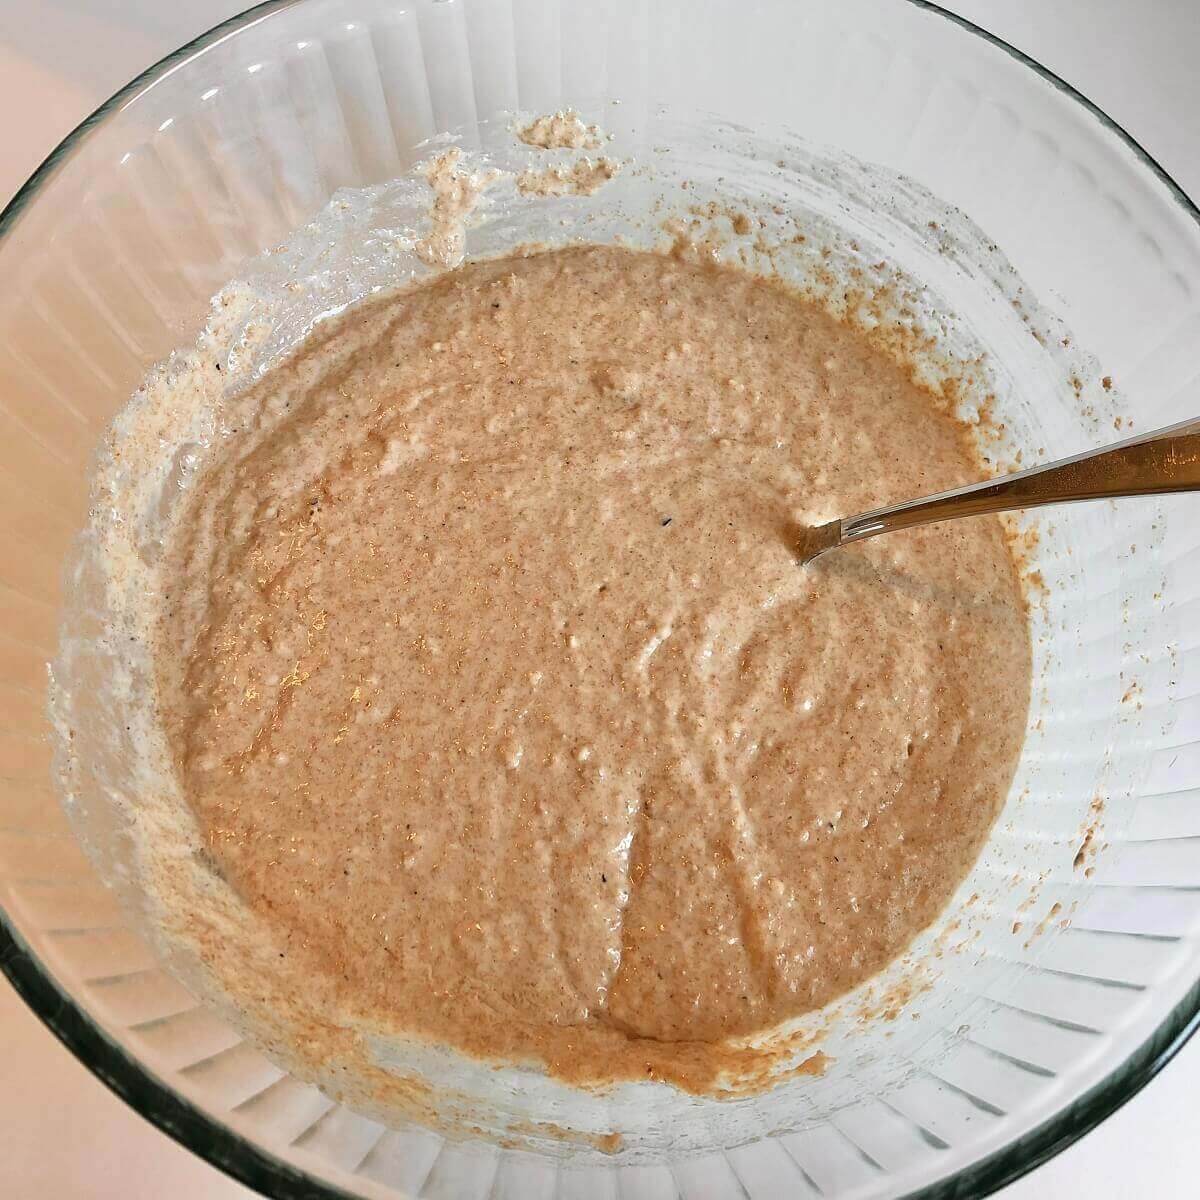 Vegan muffin batter in a large glass mixing bowl.